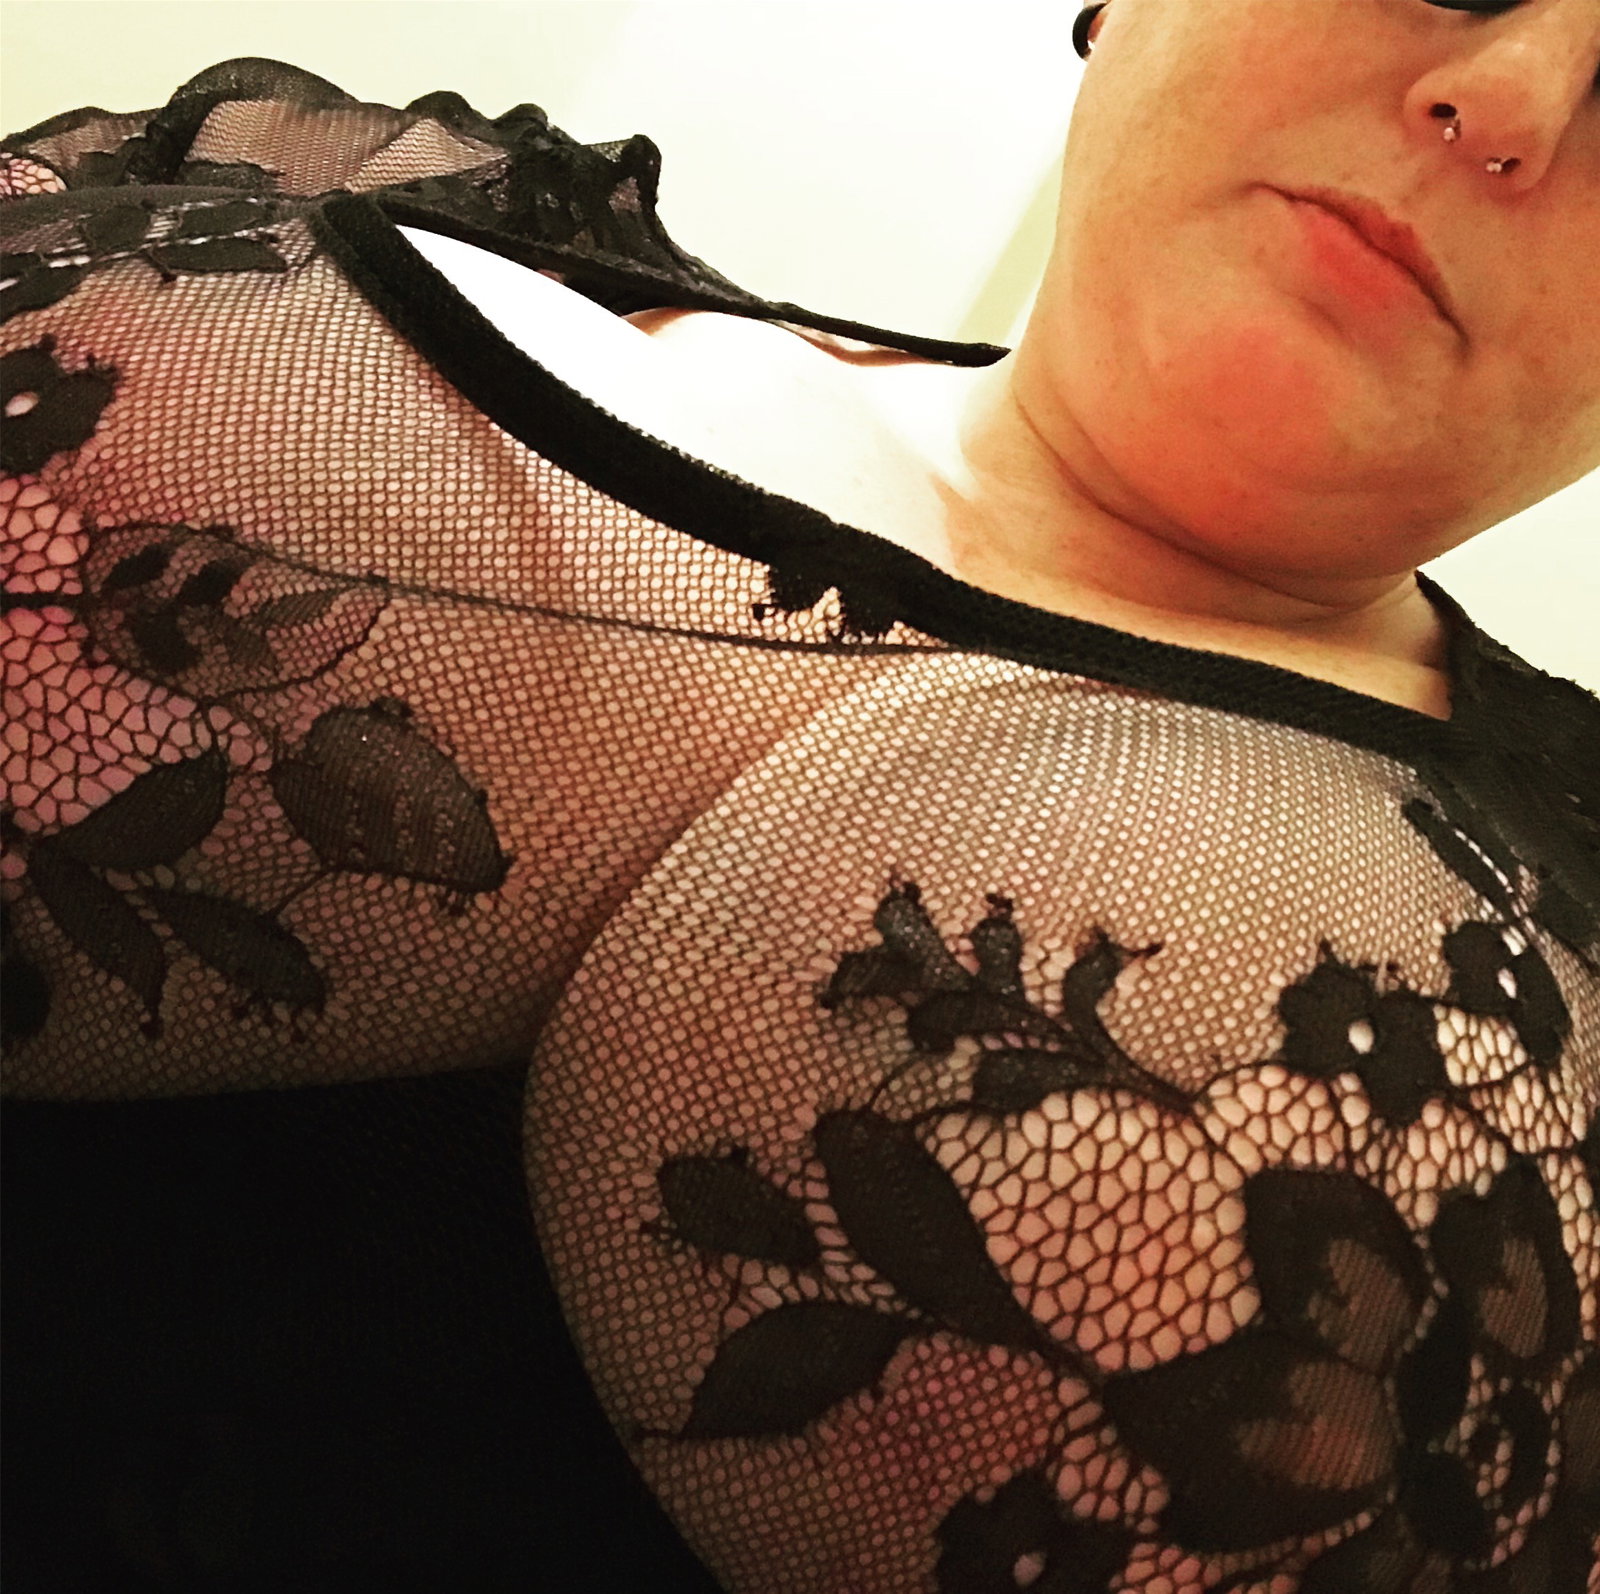 Watch the Photo by Belle Southern with the username @BelleSouthernX, who is a star user, posted on April 26, 2019